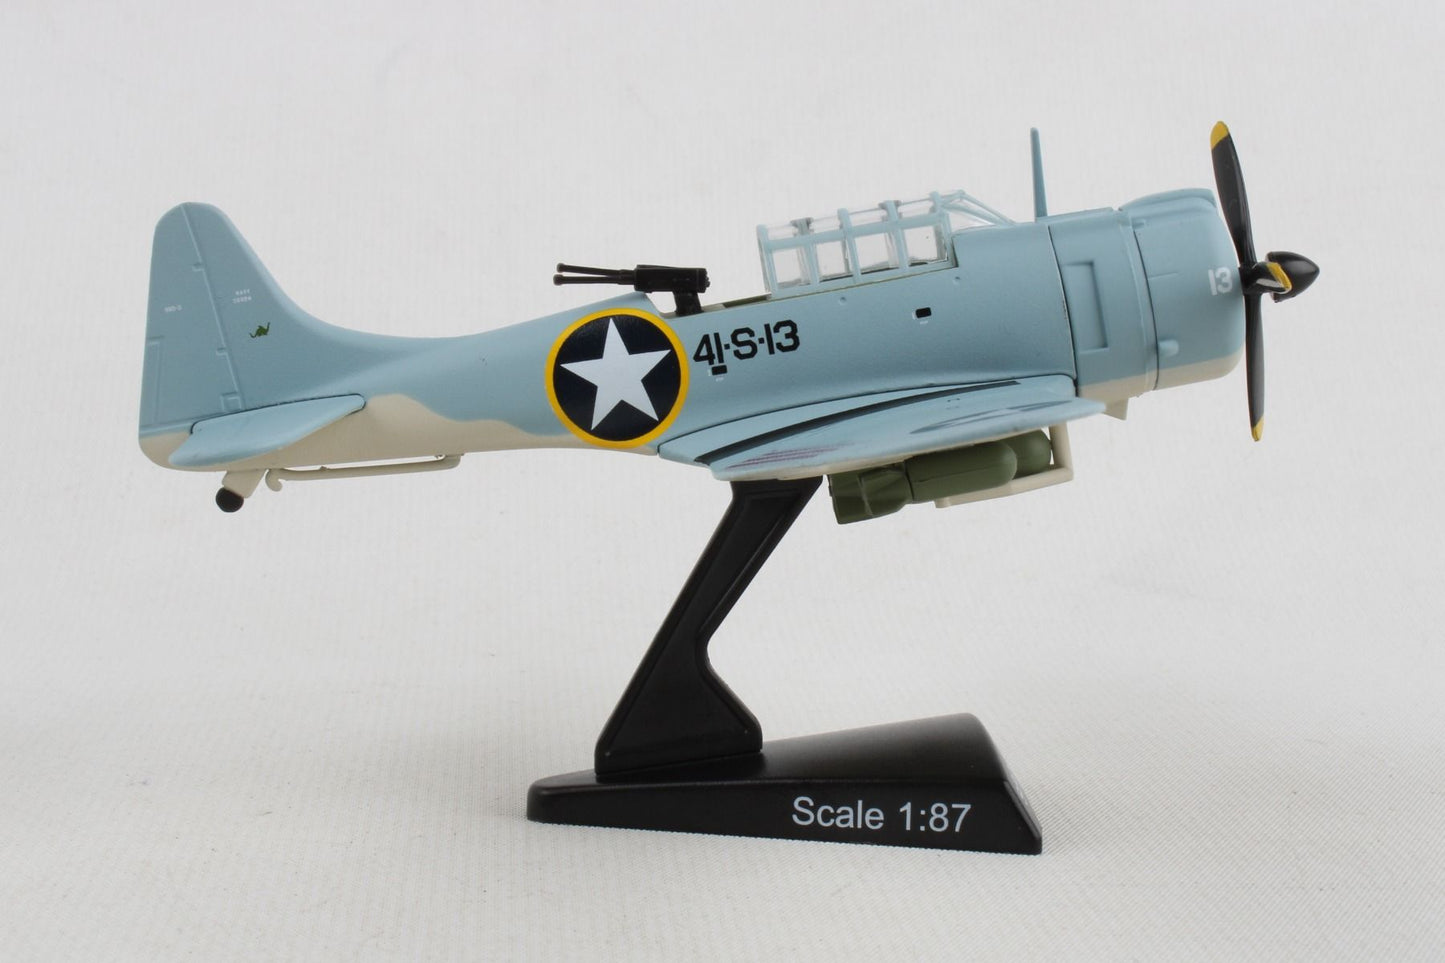 Postage Stamp USN SBD-3 41 S-13 PS5563-1 1:87 Scale